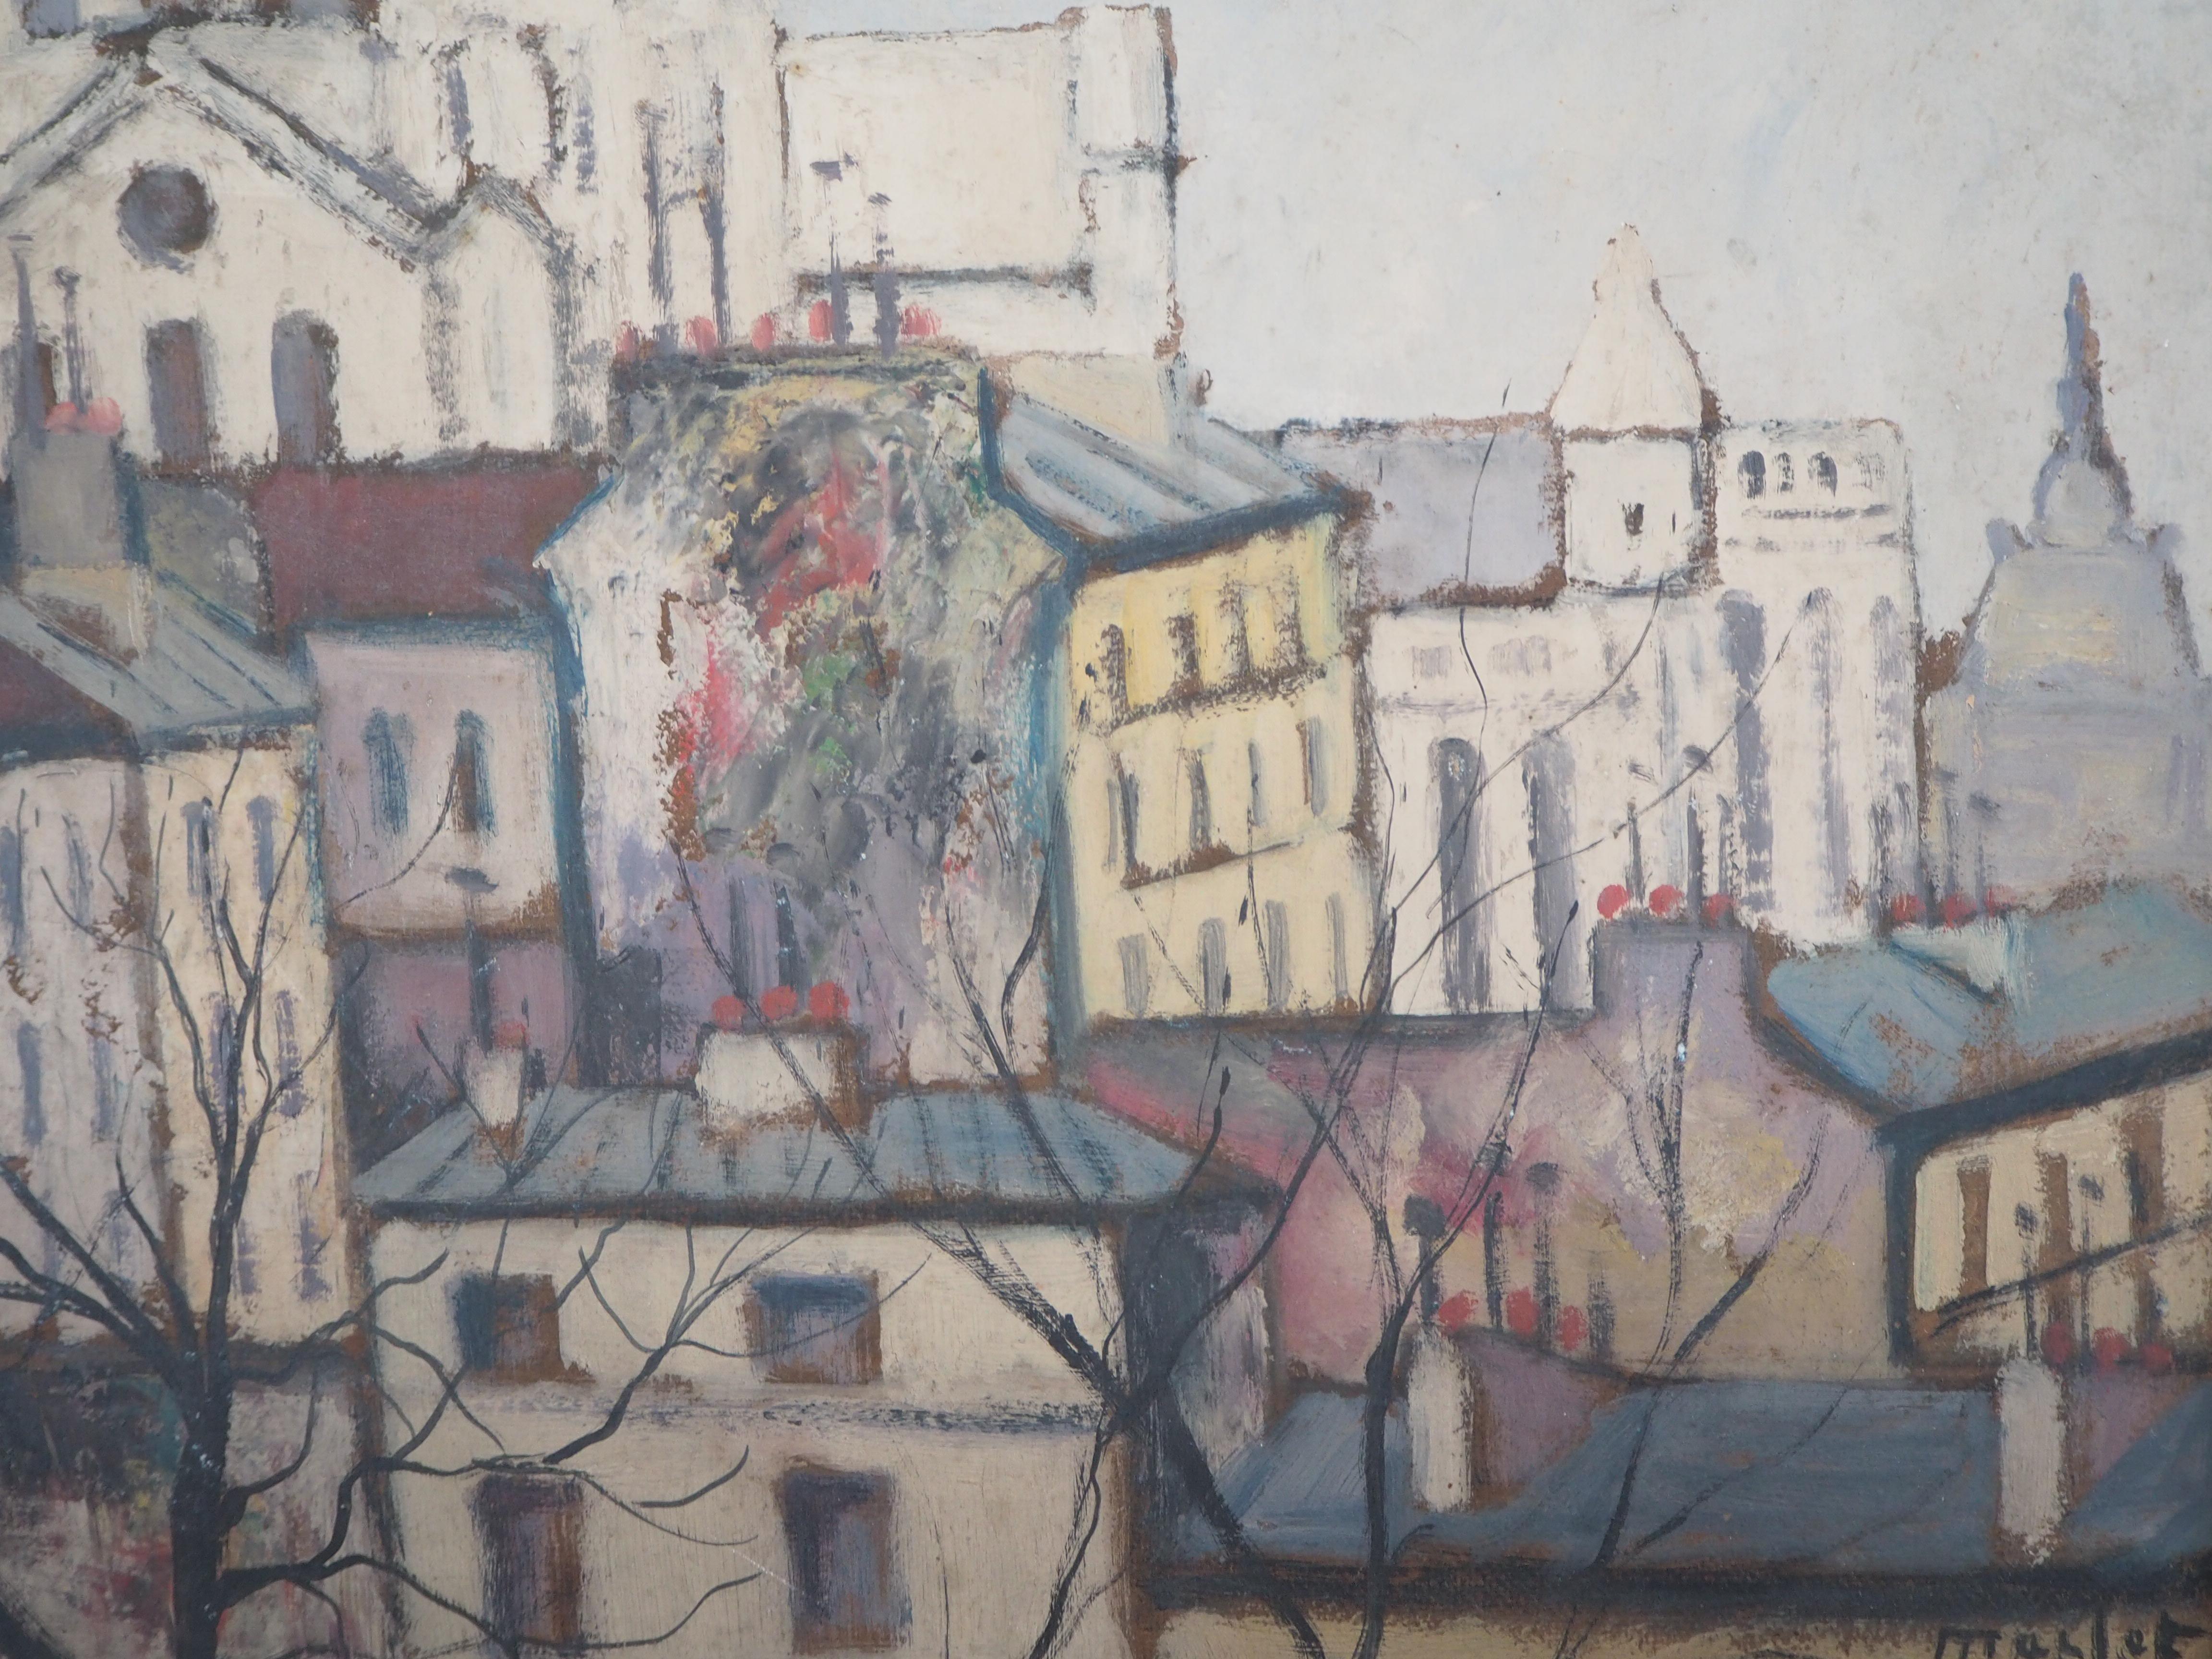 Elisée MACLET (1881-1962)
Paris : Sacre Coeur Church and Montmartre

Original oil on panel
Signed bottom left
On board 46 x 55 cm (c. 18 x 22 in) 
Presented in a golden frame, 67 x 58 cm (c. 26 x 23 in)

Very good condition, light defects to the